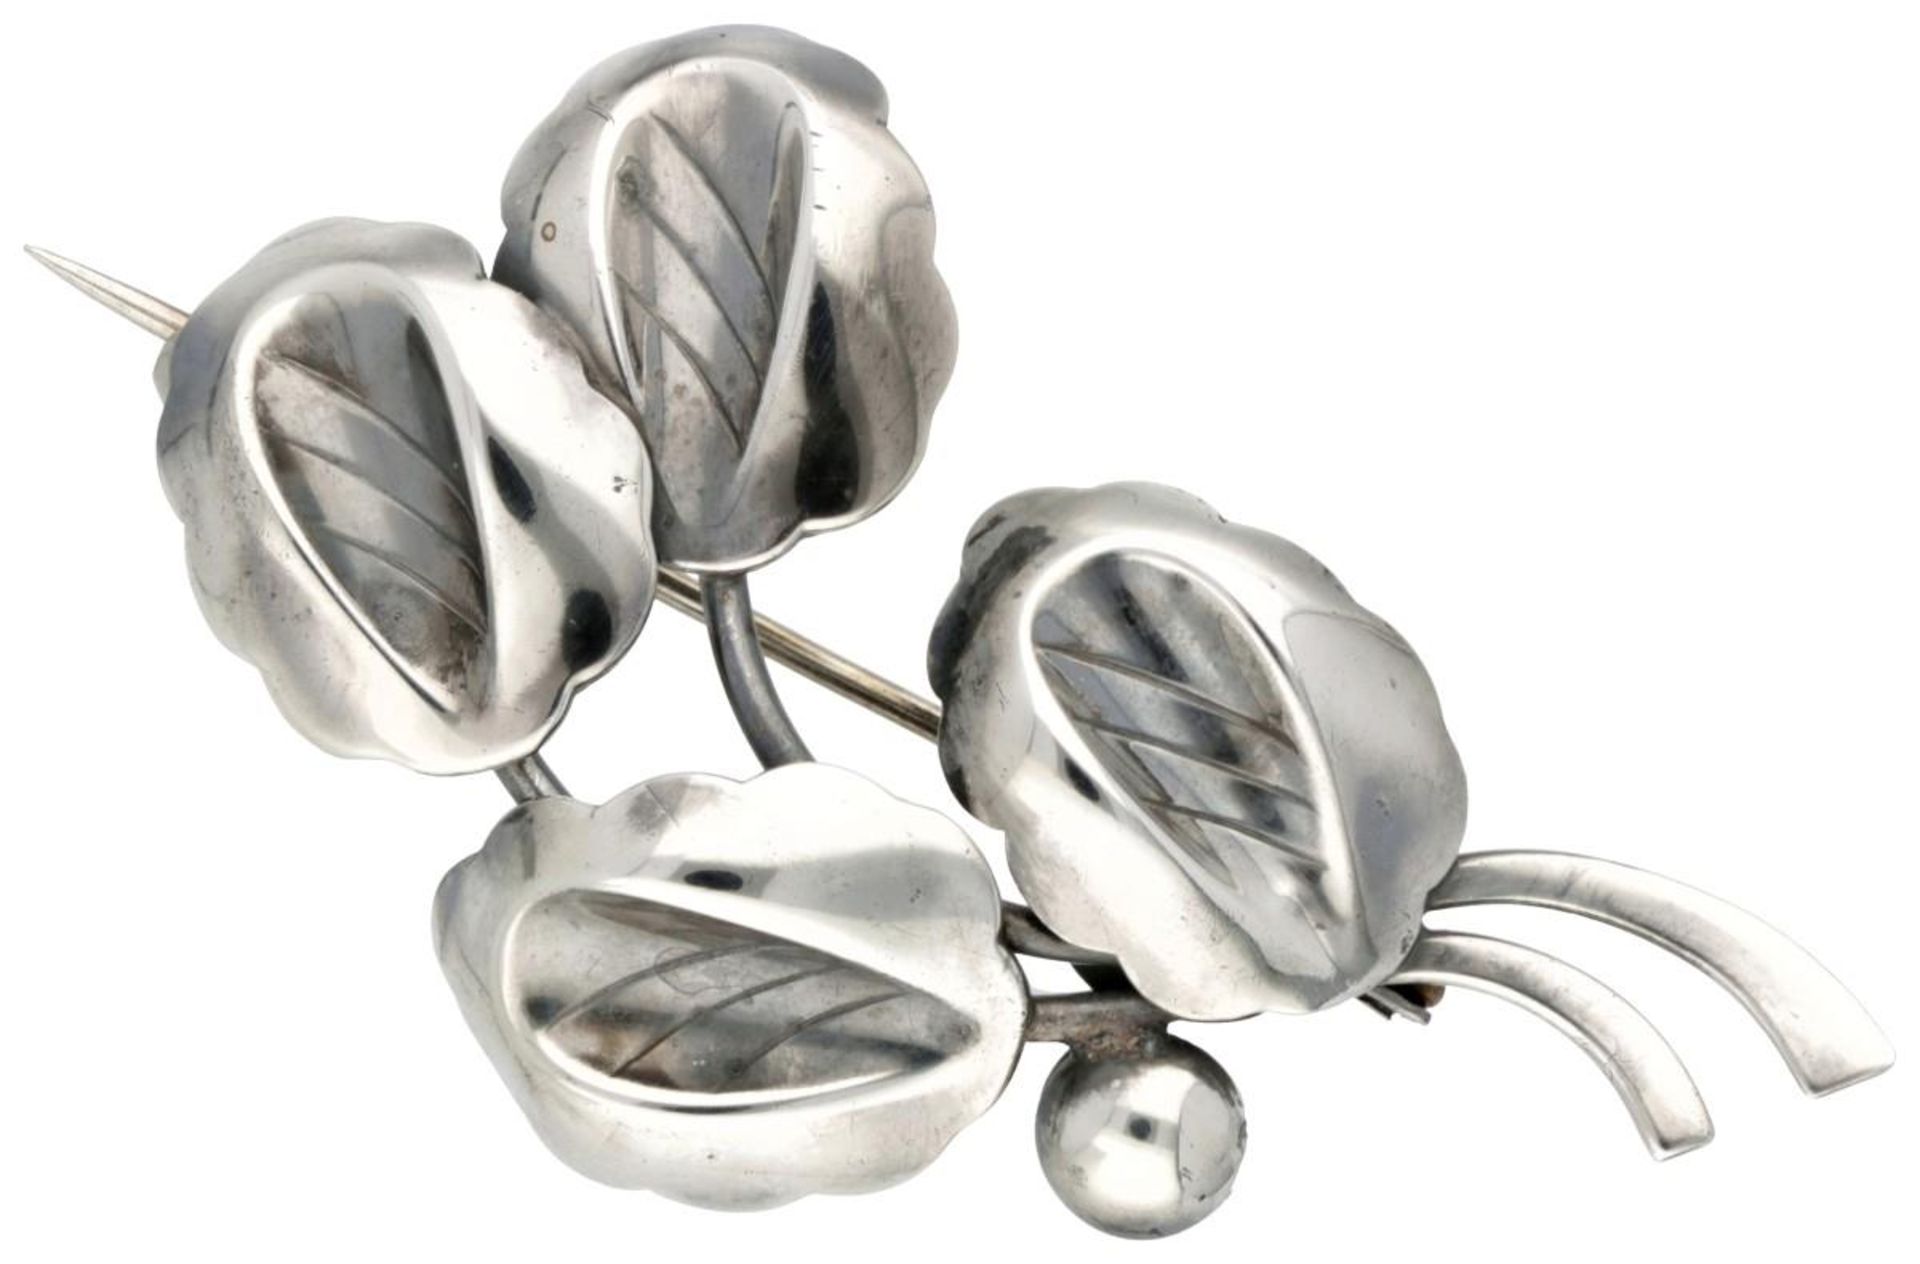 Vintage sterling silver brooch by Max Standager.